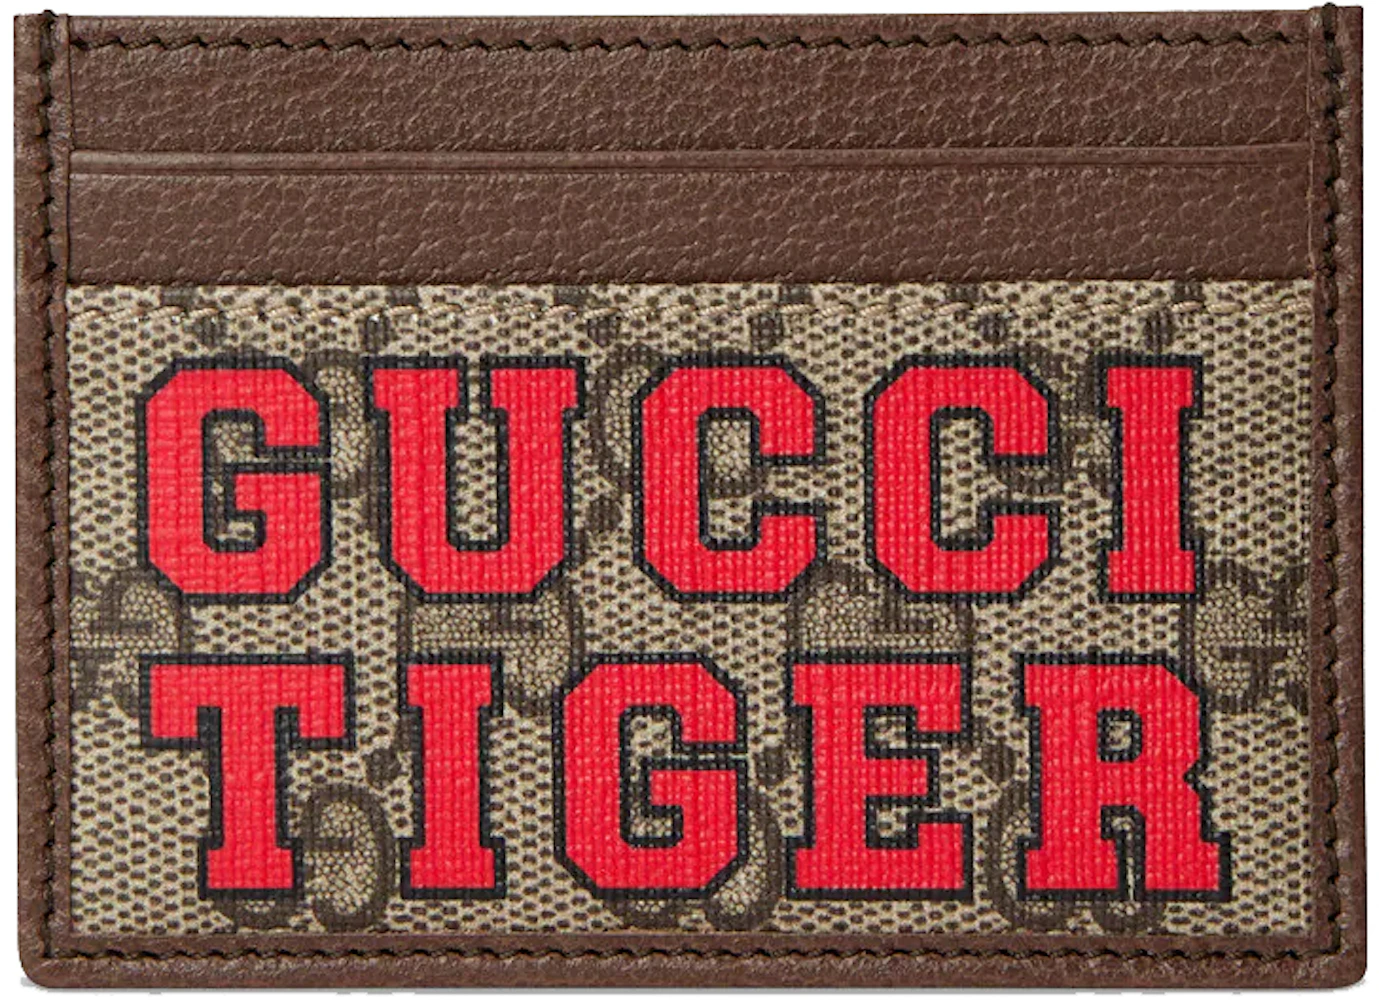 Gucci Tiger Wallet Beige/Ebony in Canvas/Leather - US